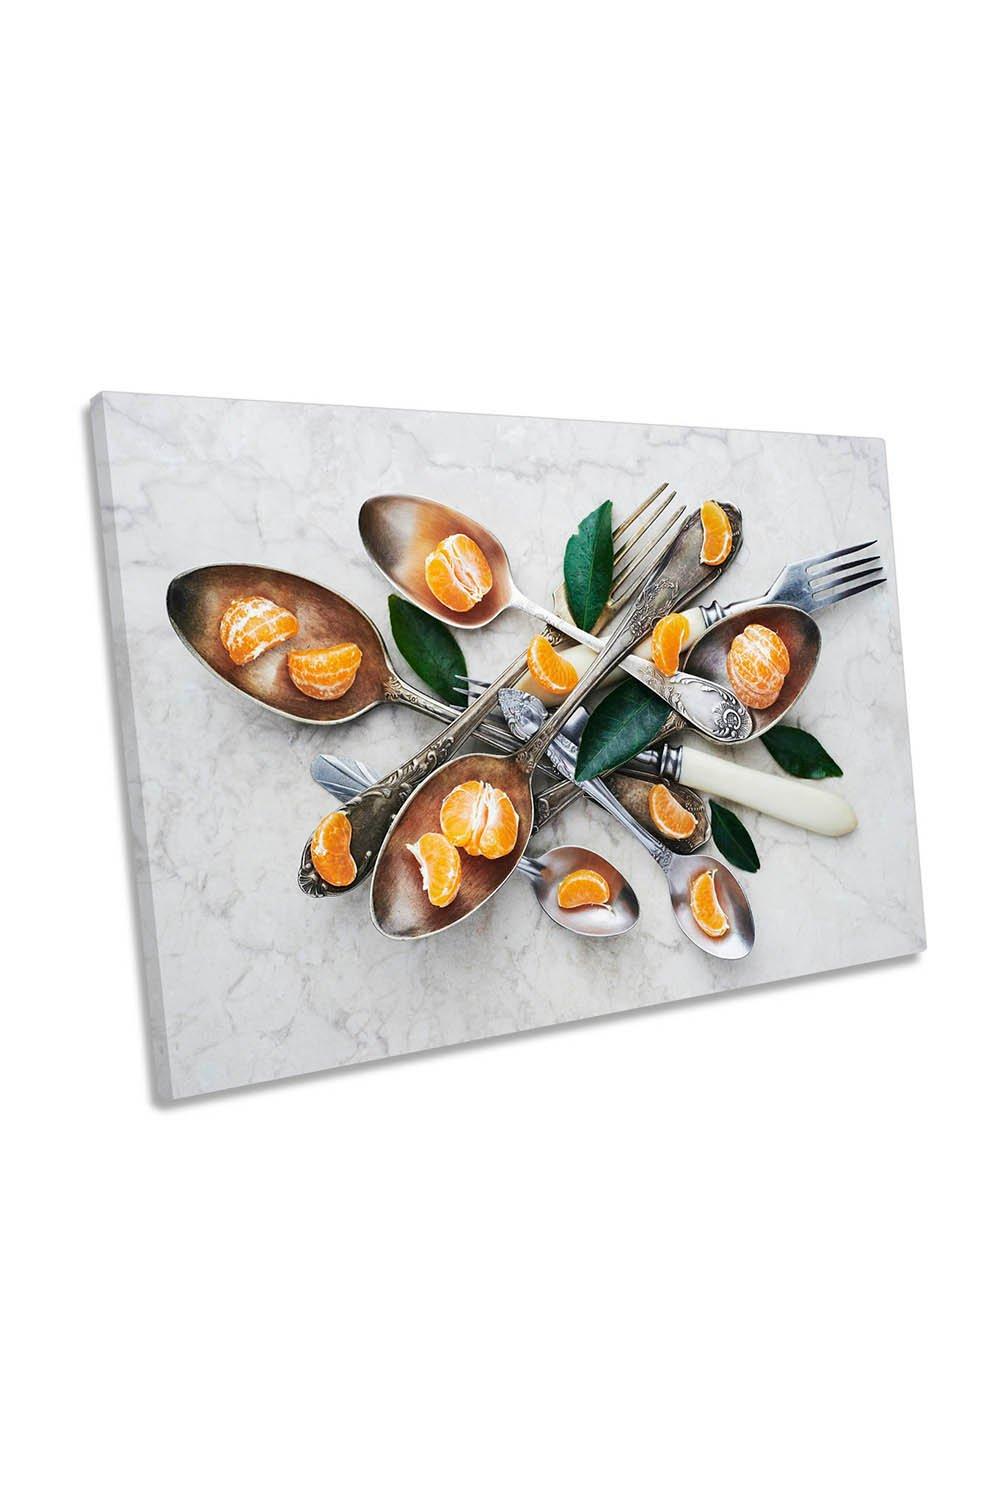 Spoons Tangerines Kitchen Orange Canvas Wall Art Picture Print